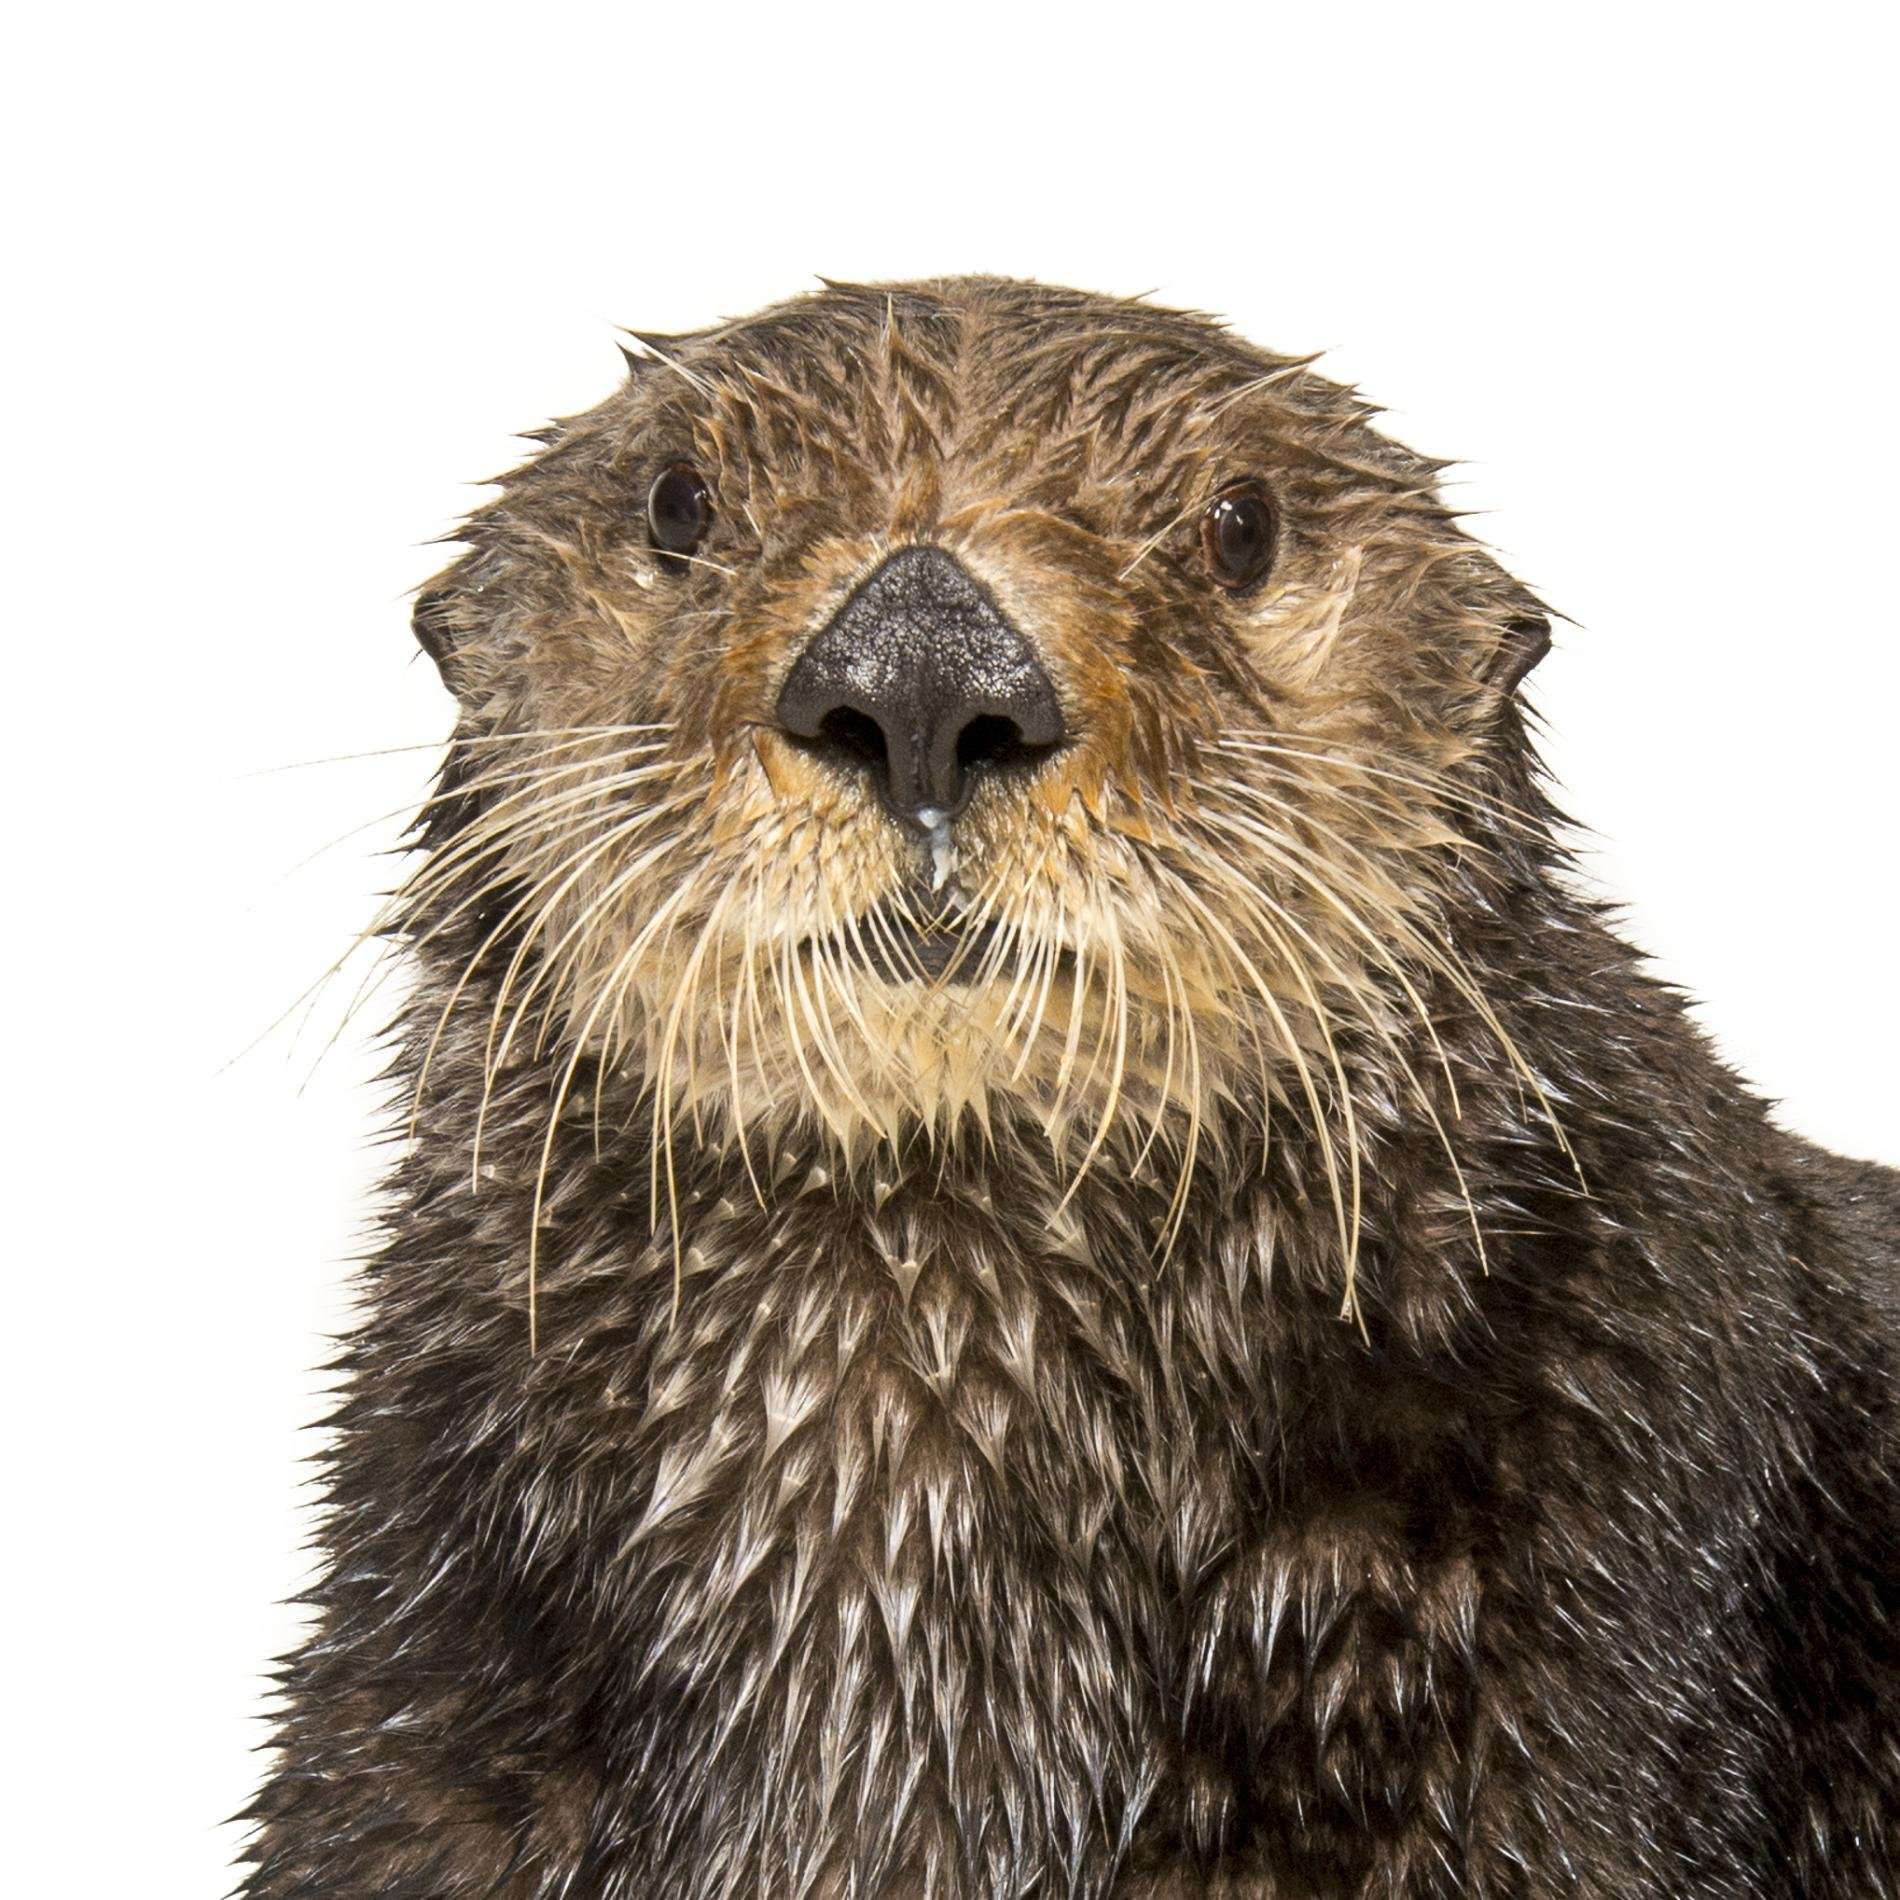 image for TIL that sea otters have a pocket set across their chest in which they carry their favorite rock. This rock is used to crack open shellfish and each rock is unique to that specific otter. They tend to hold onto the same rock for life.